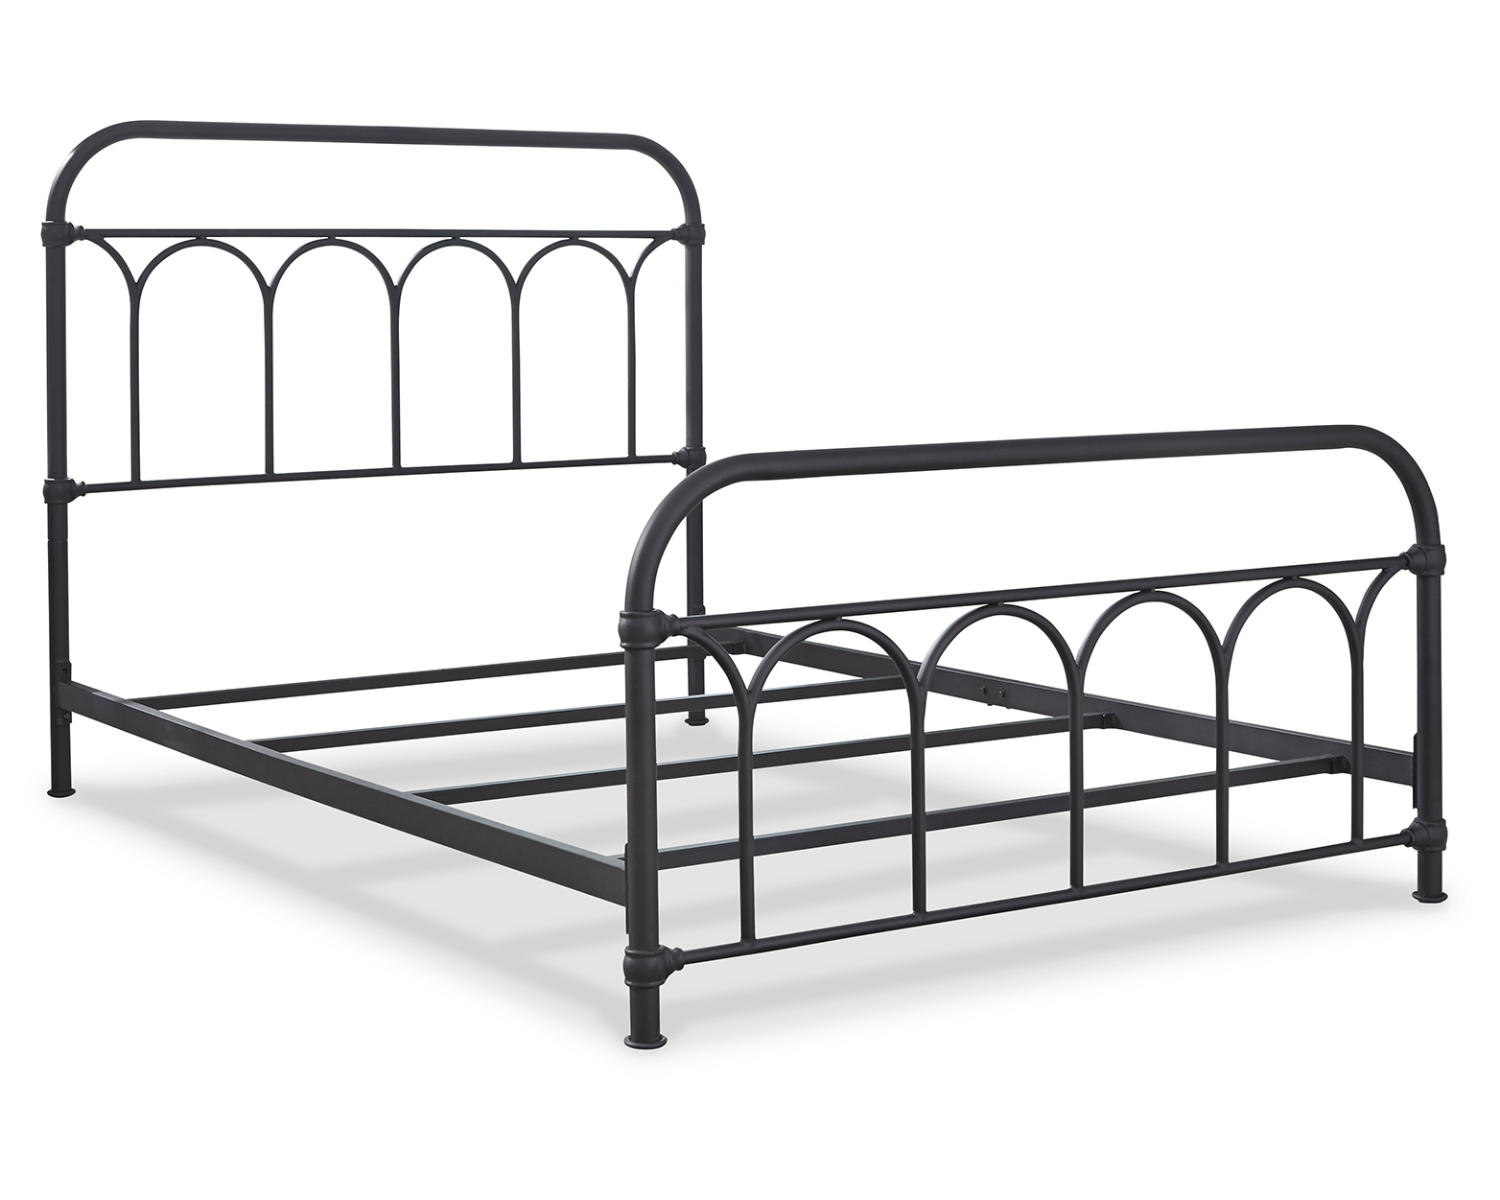 Signature Design by Ashley Casual Nashburg Full Metal Bed  Black - image 5 of 8